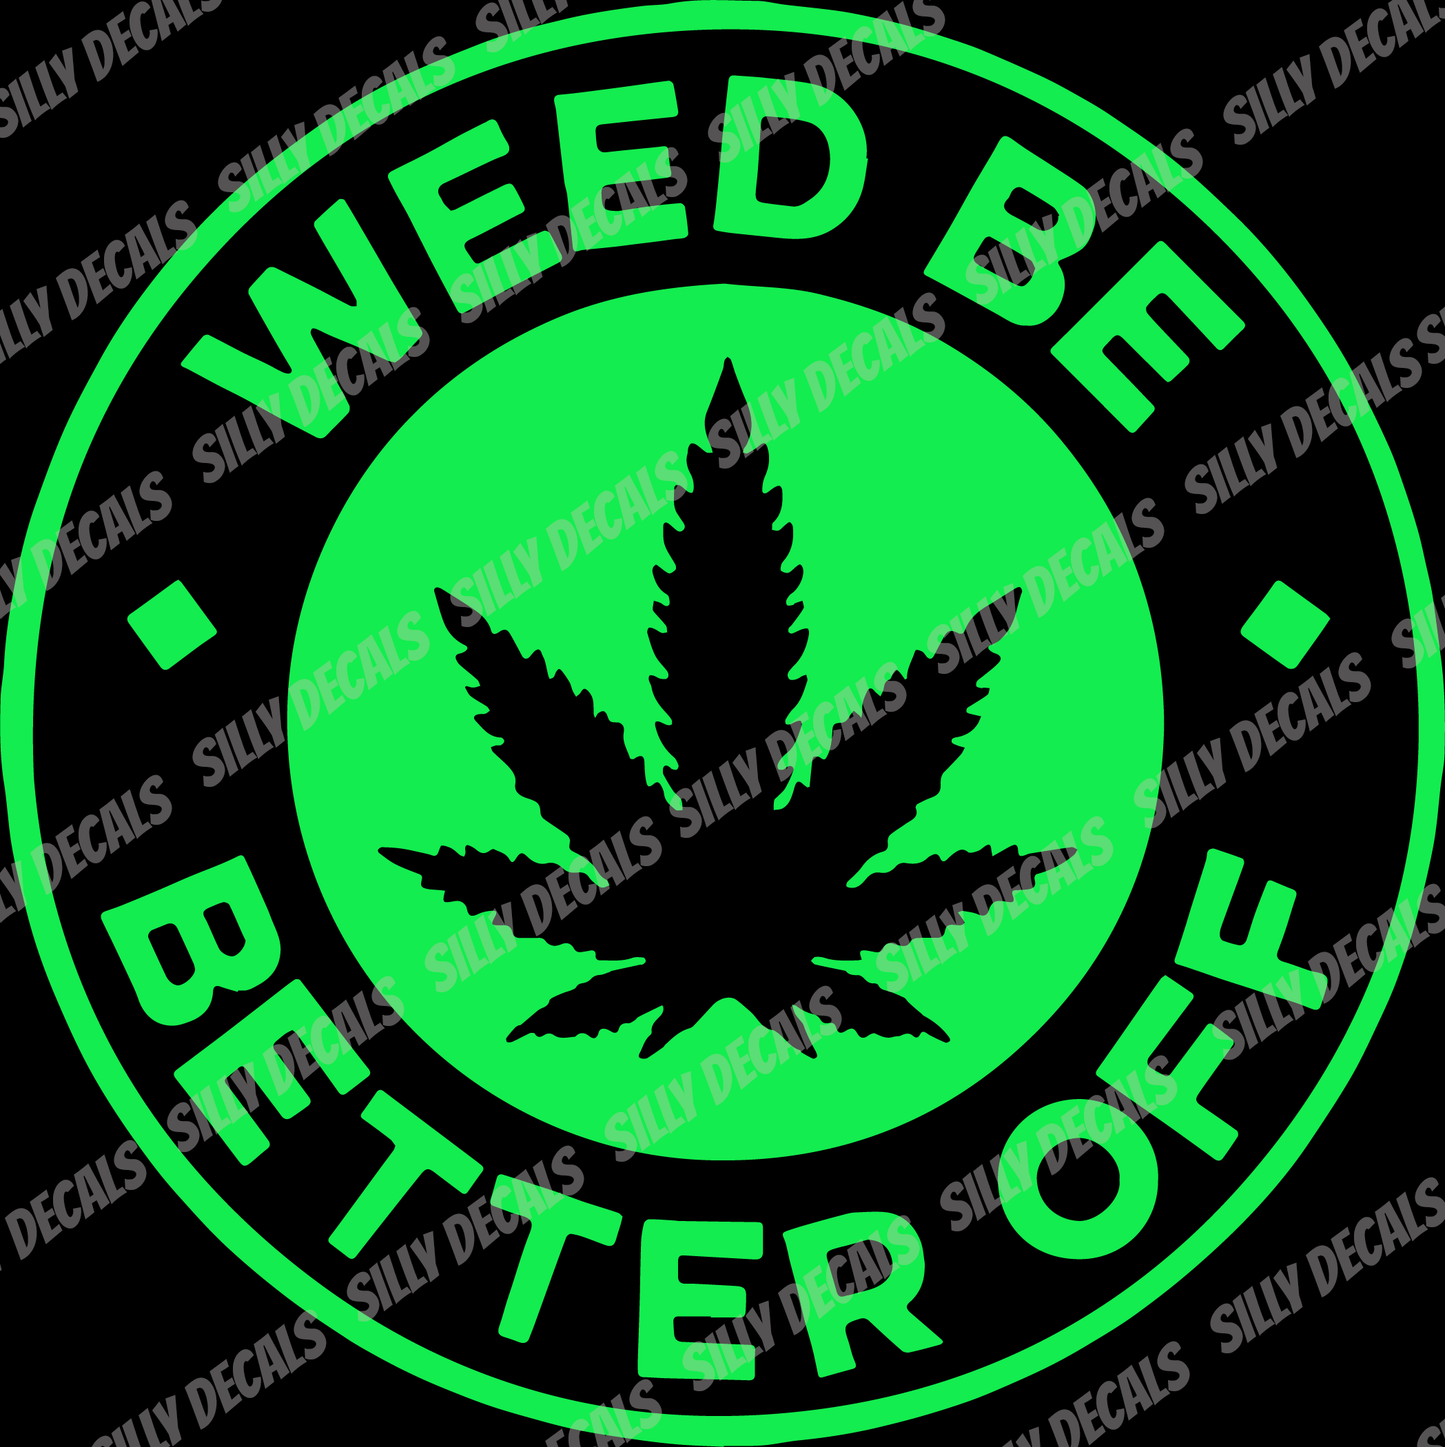 Weed Be Better Off; 420 Vinyl Decals Suitable For Cars, Windows, Walls, and More!